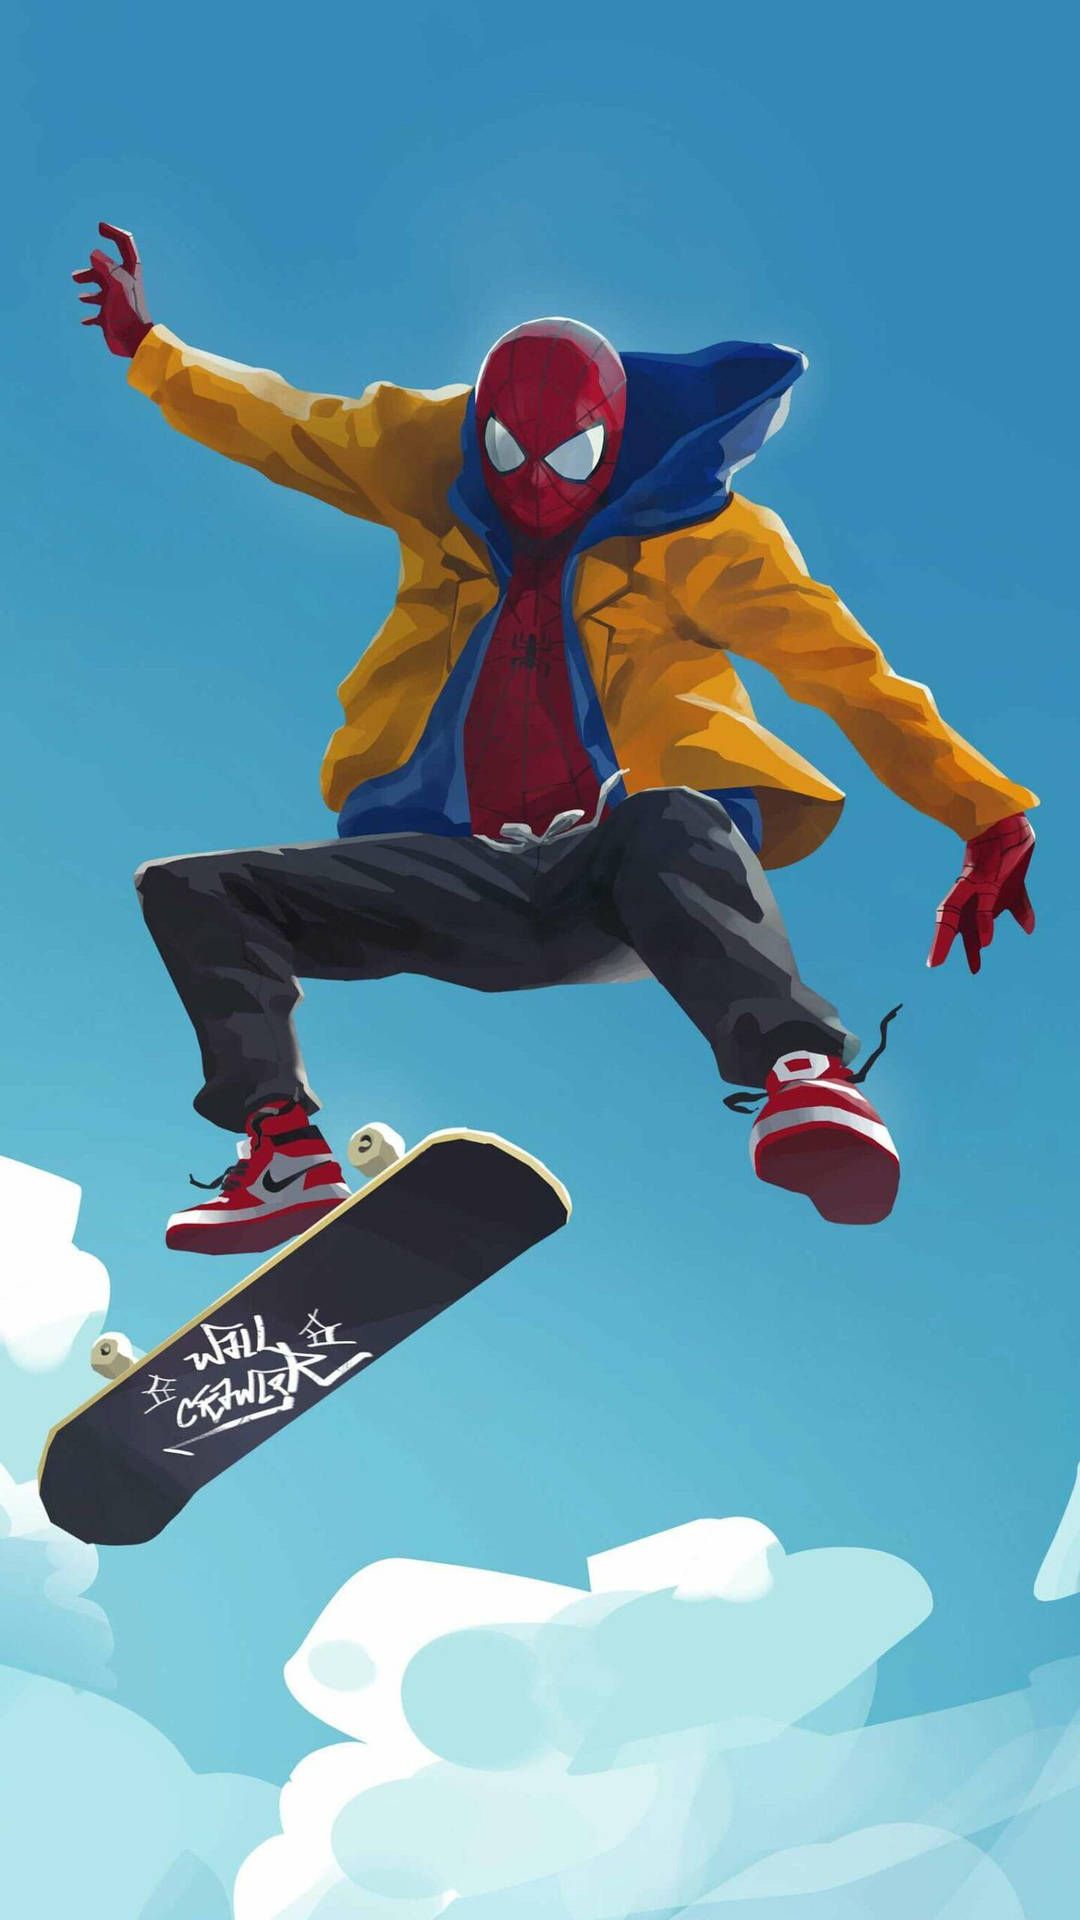 IPhone wallpaper with Spiderman in the air - 